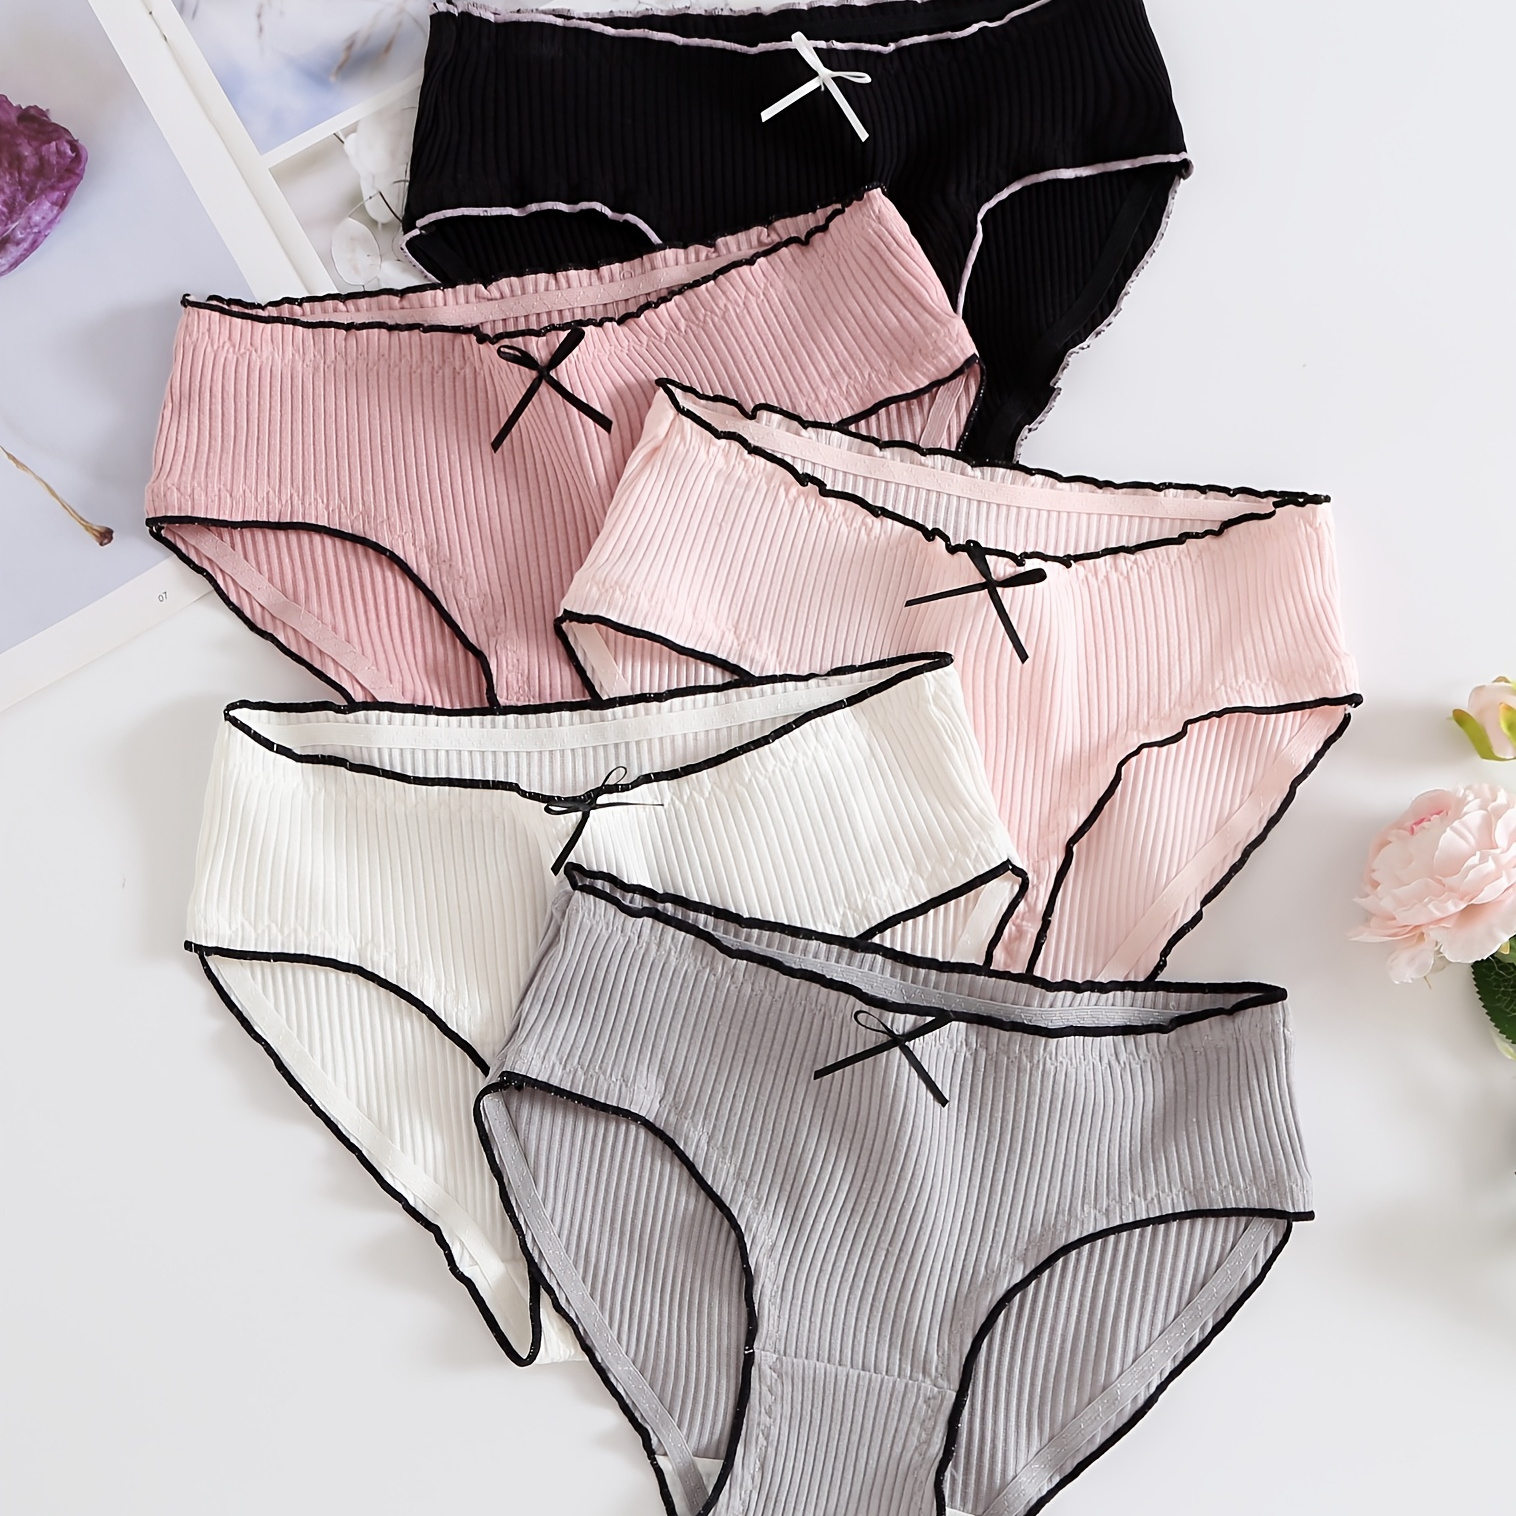 

5pcs Bow Tie Ribbed Briefs, Comfy & Cute Stretchy Intimates Panties, Women's Lingerie & Underwear